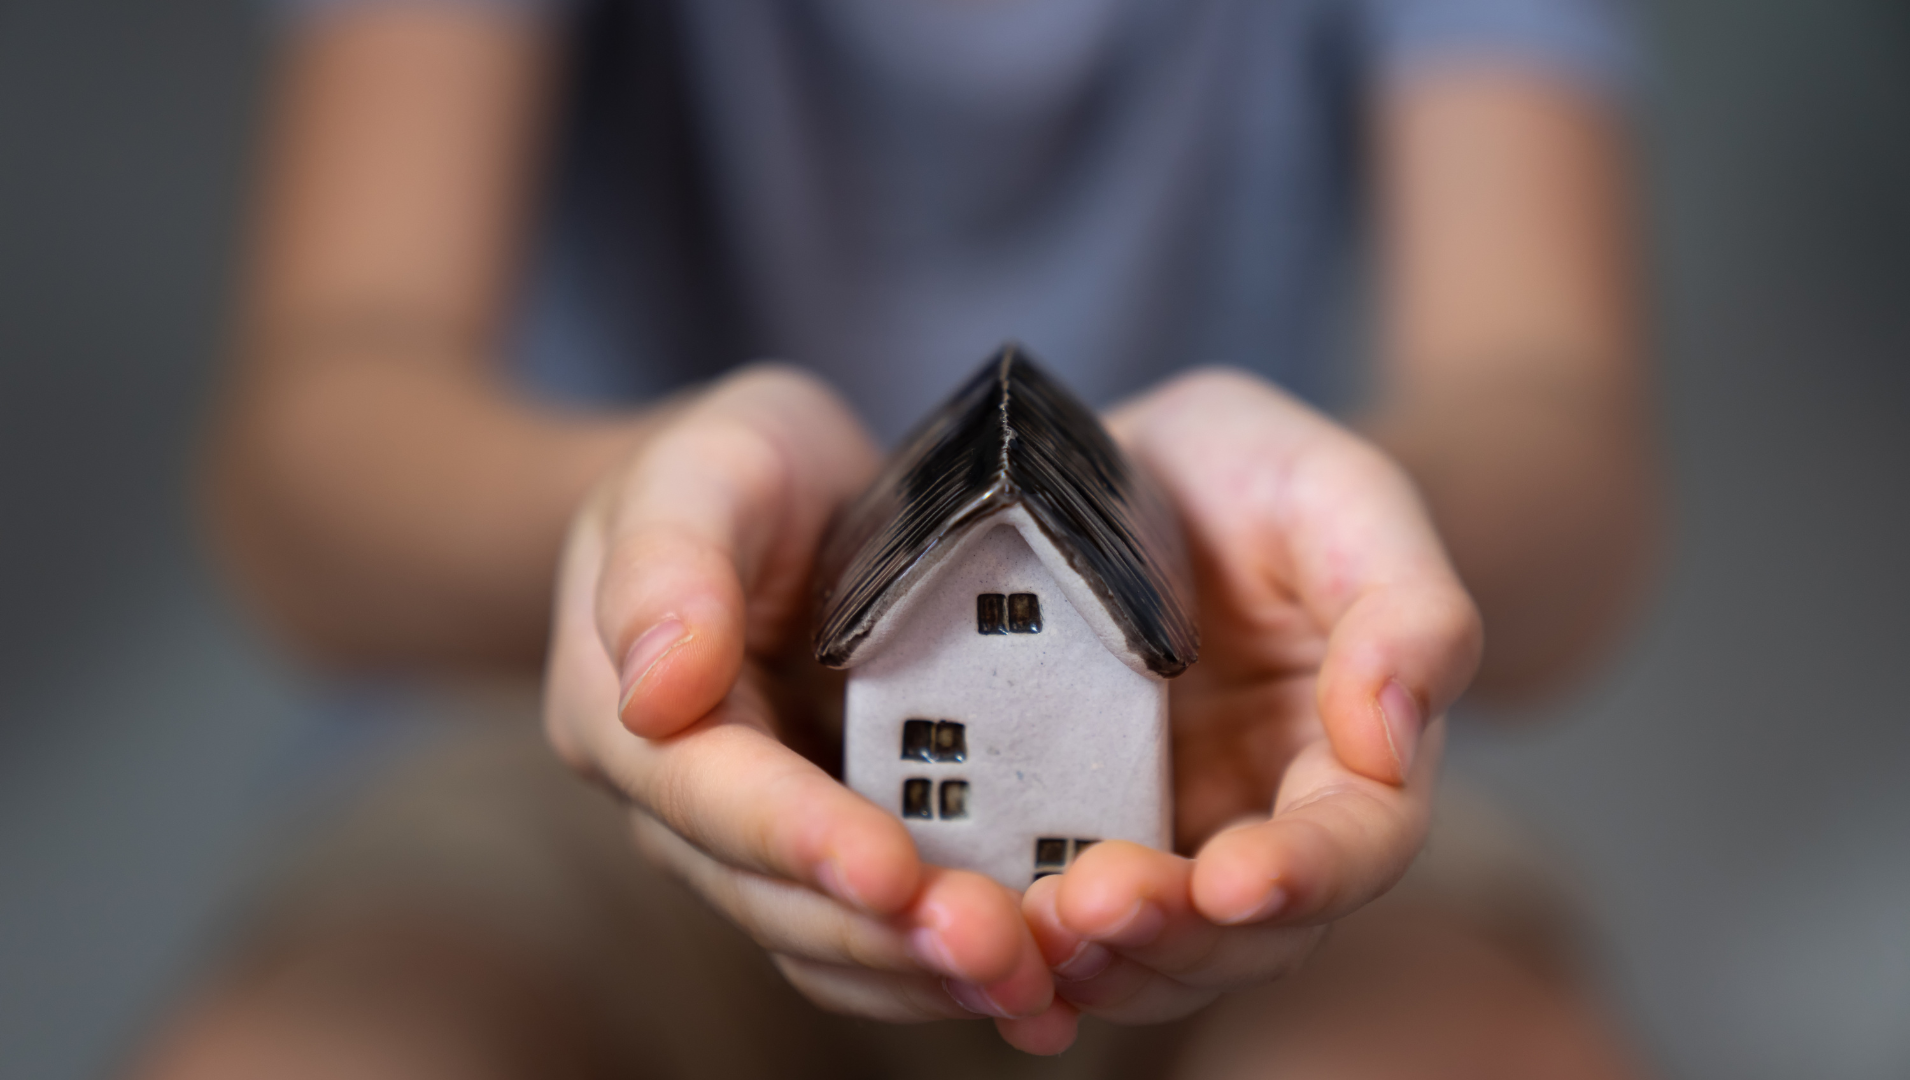 A child's hands cupping a small ceramic house, the background of the photo is blurred